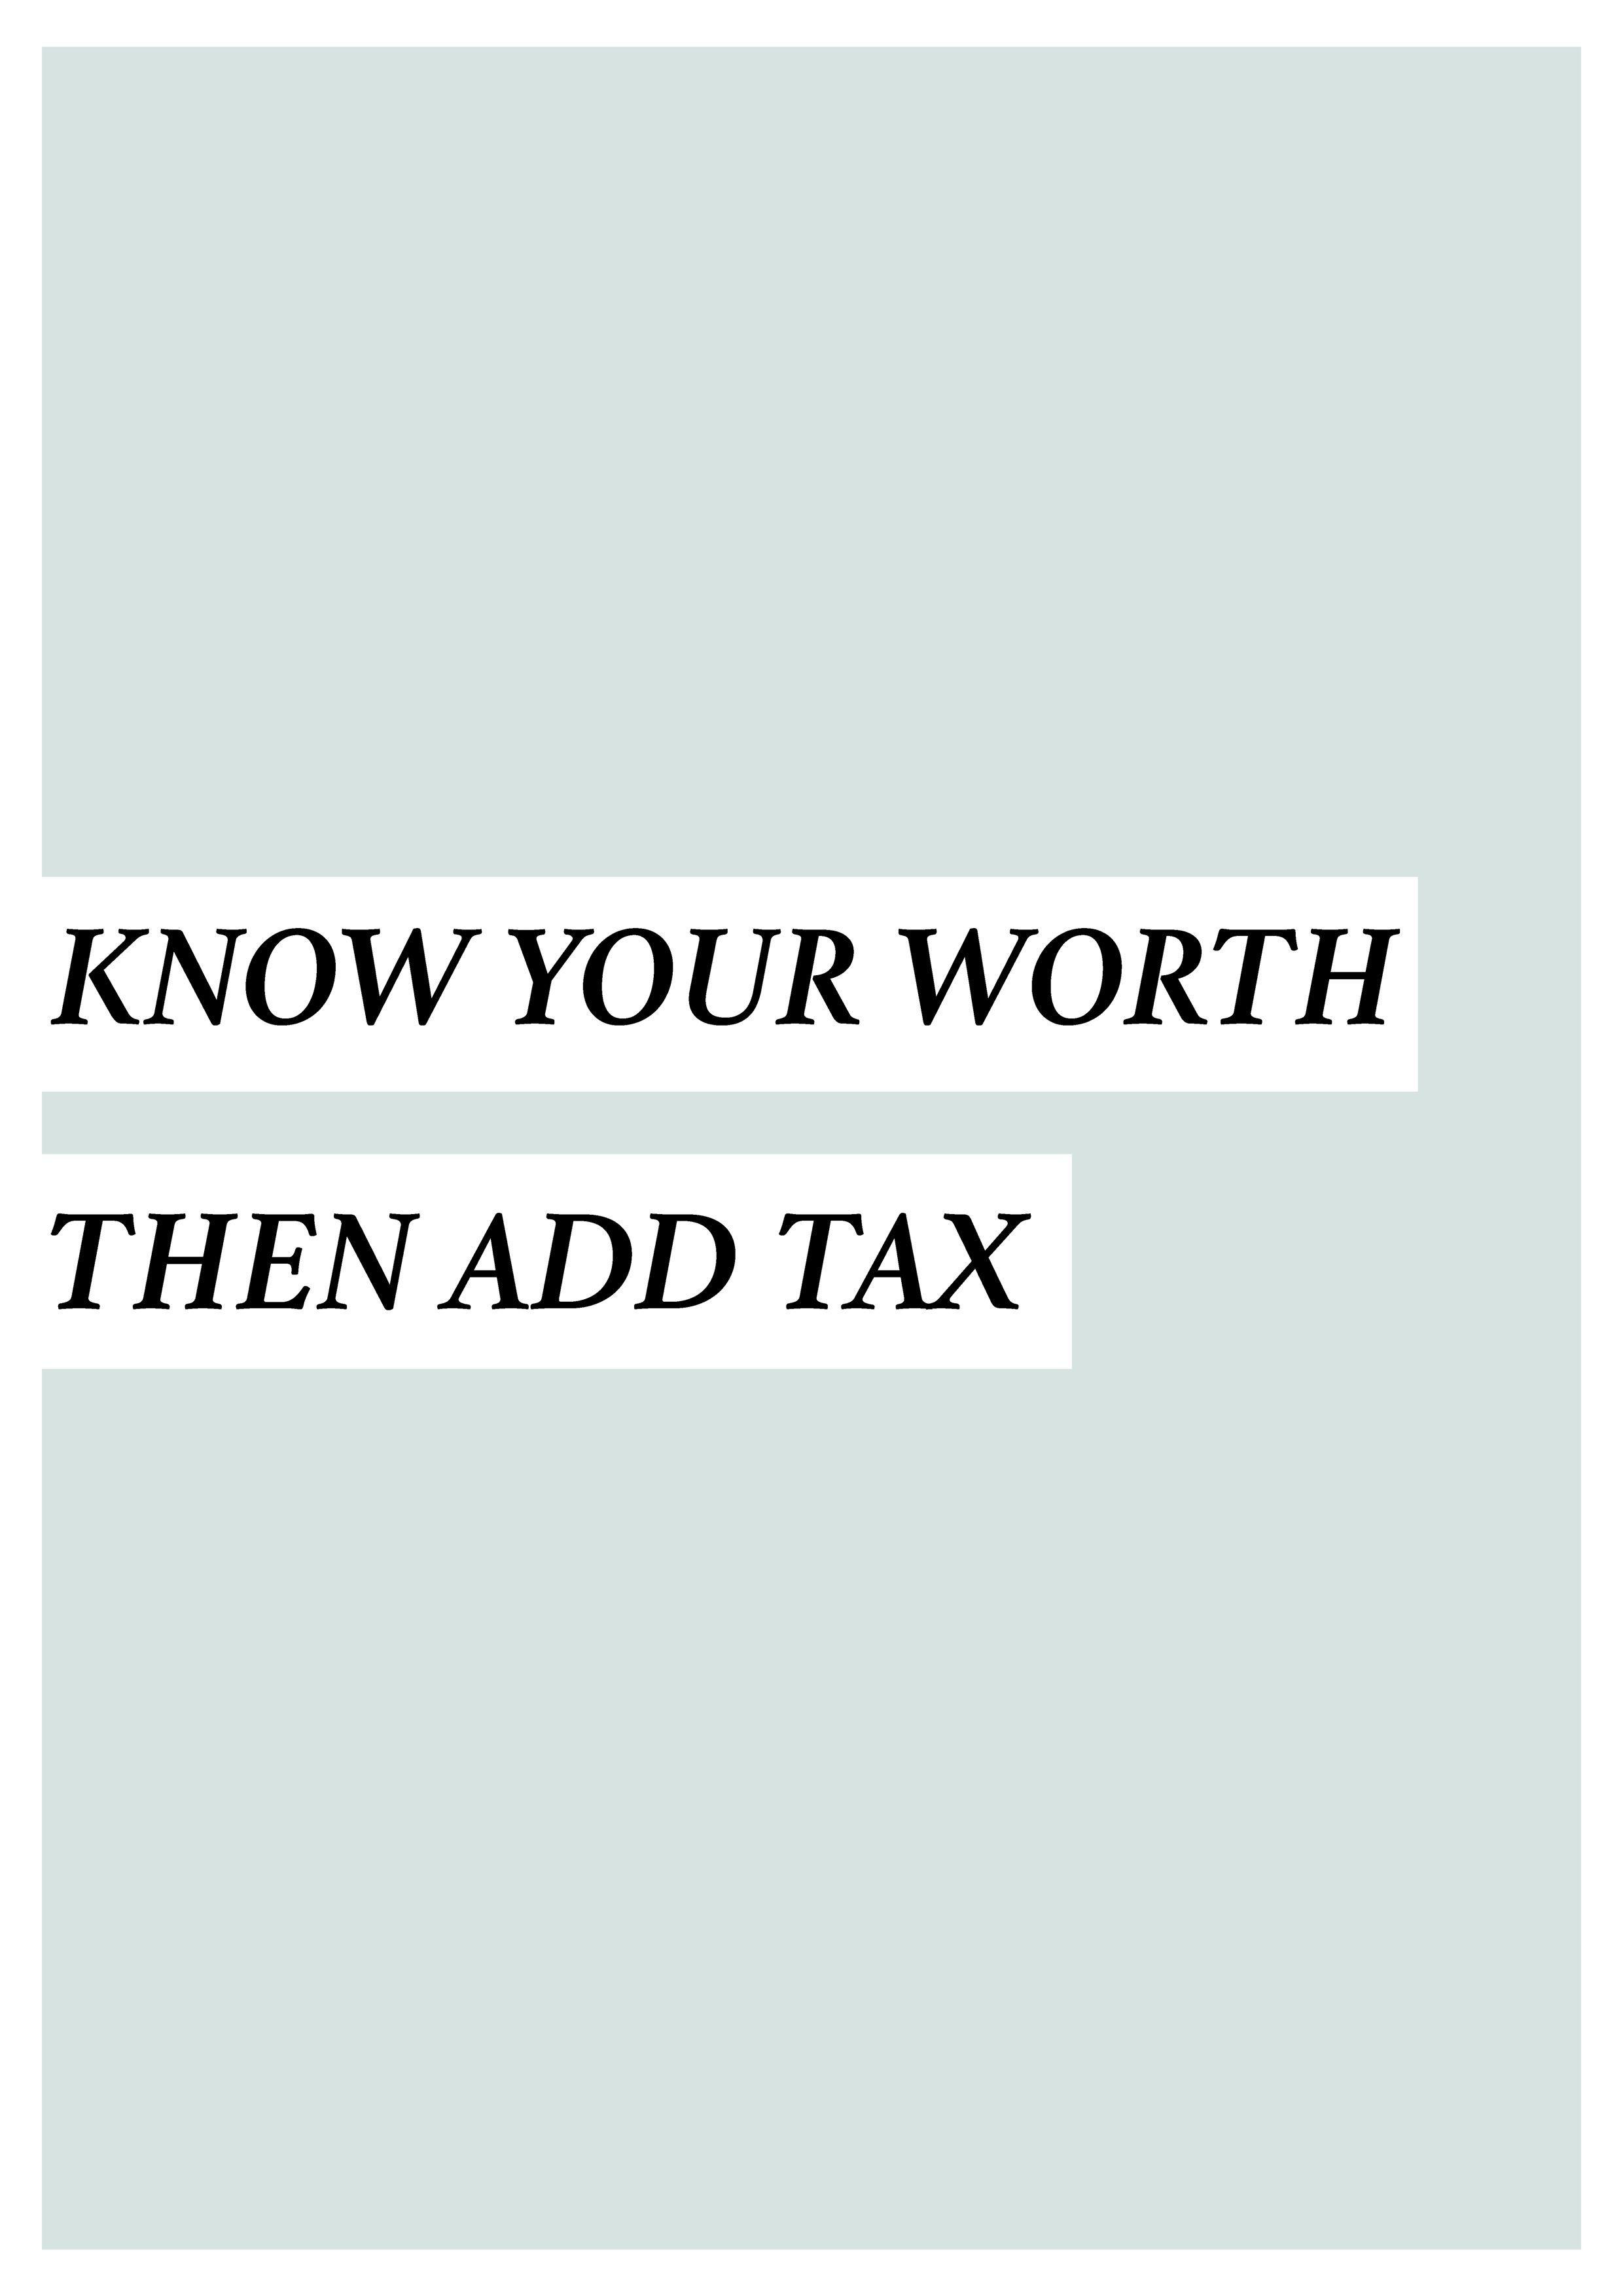 Know Your Worth Inspirational Wall Art Print. My Designs